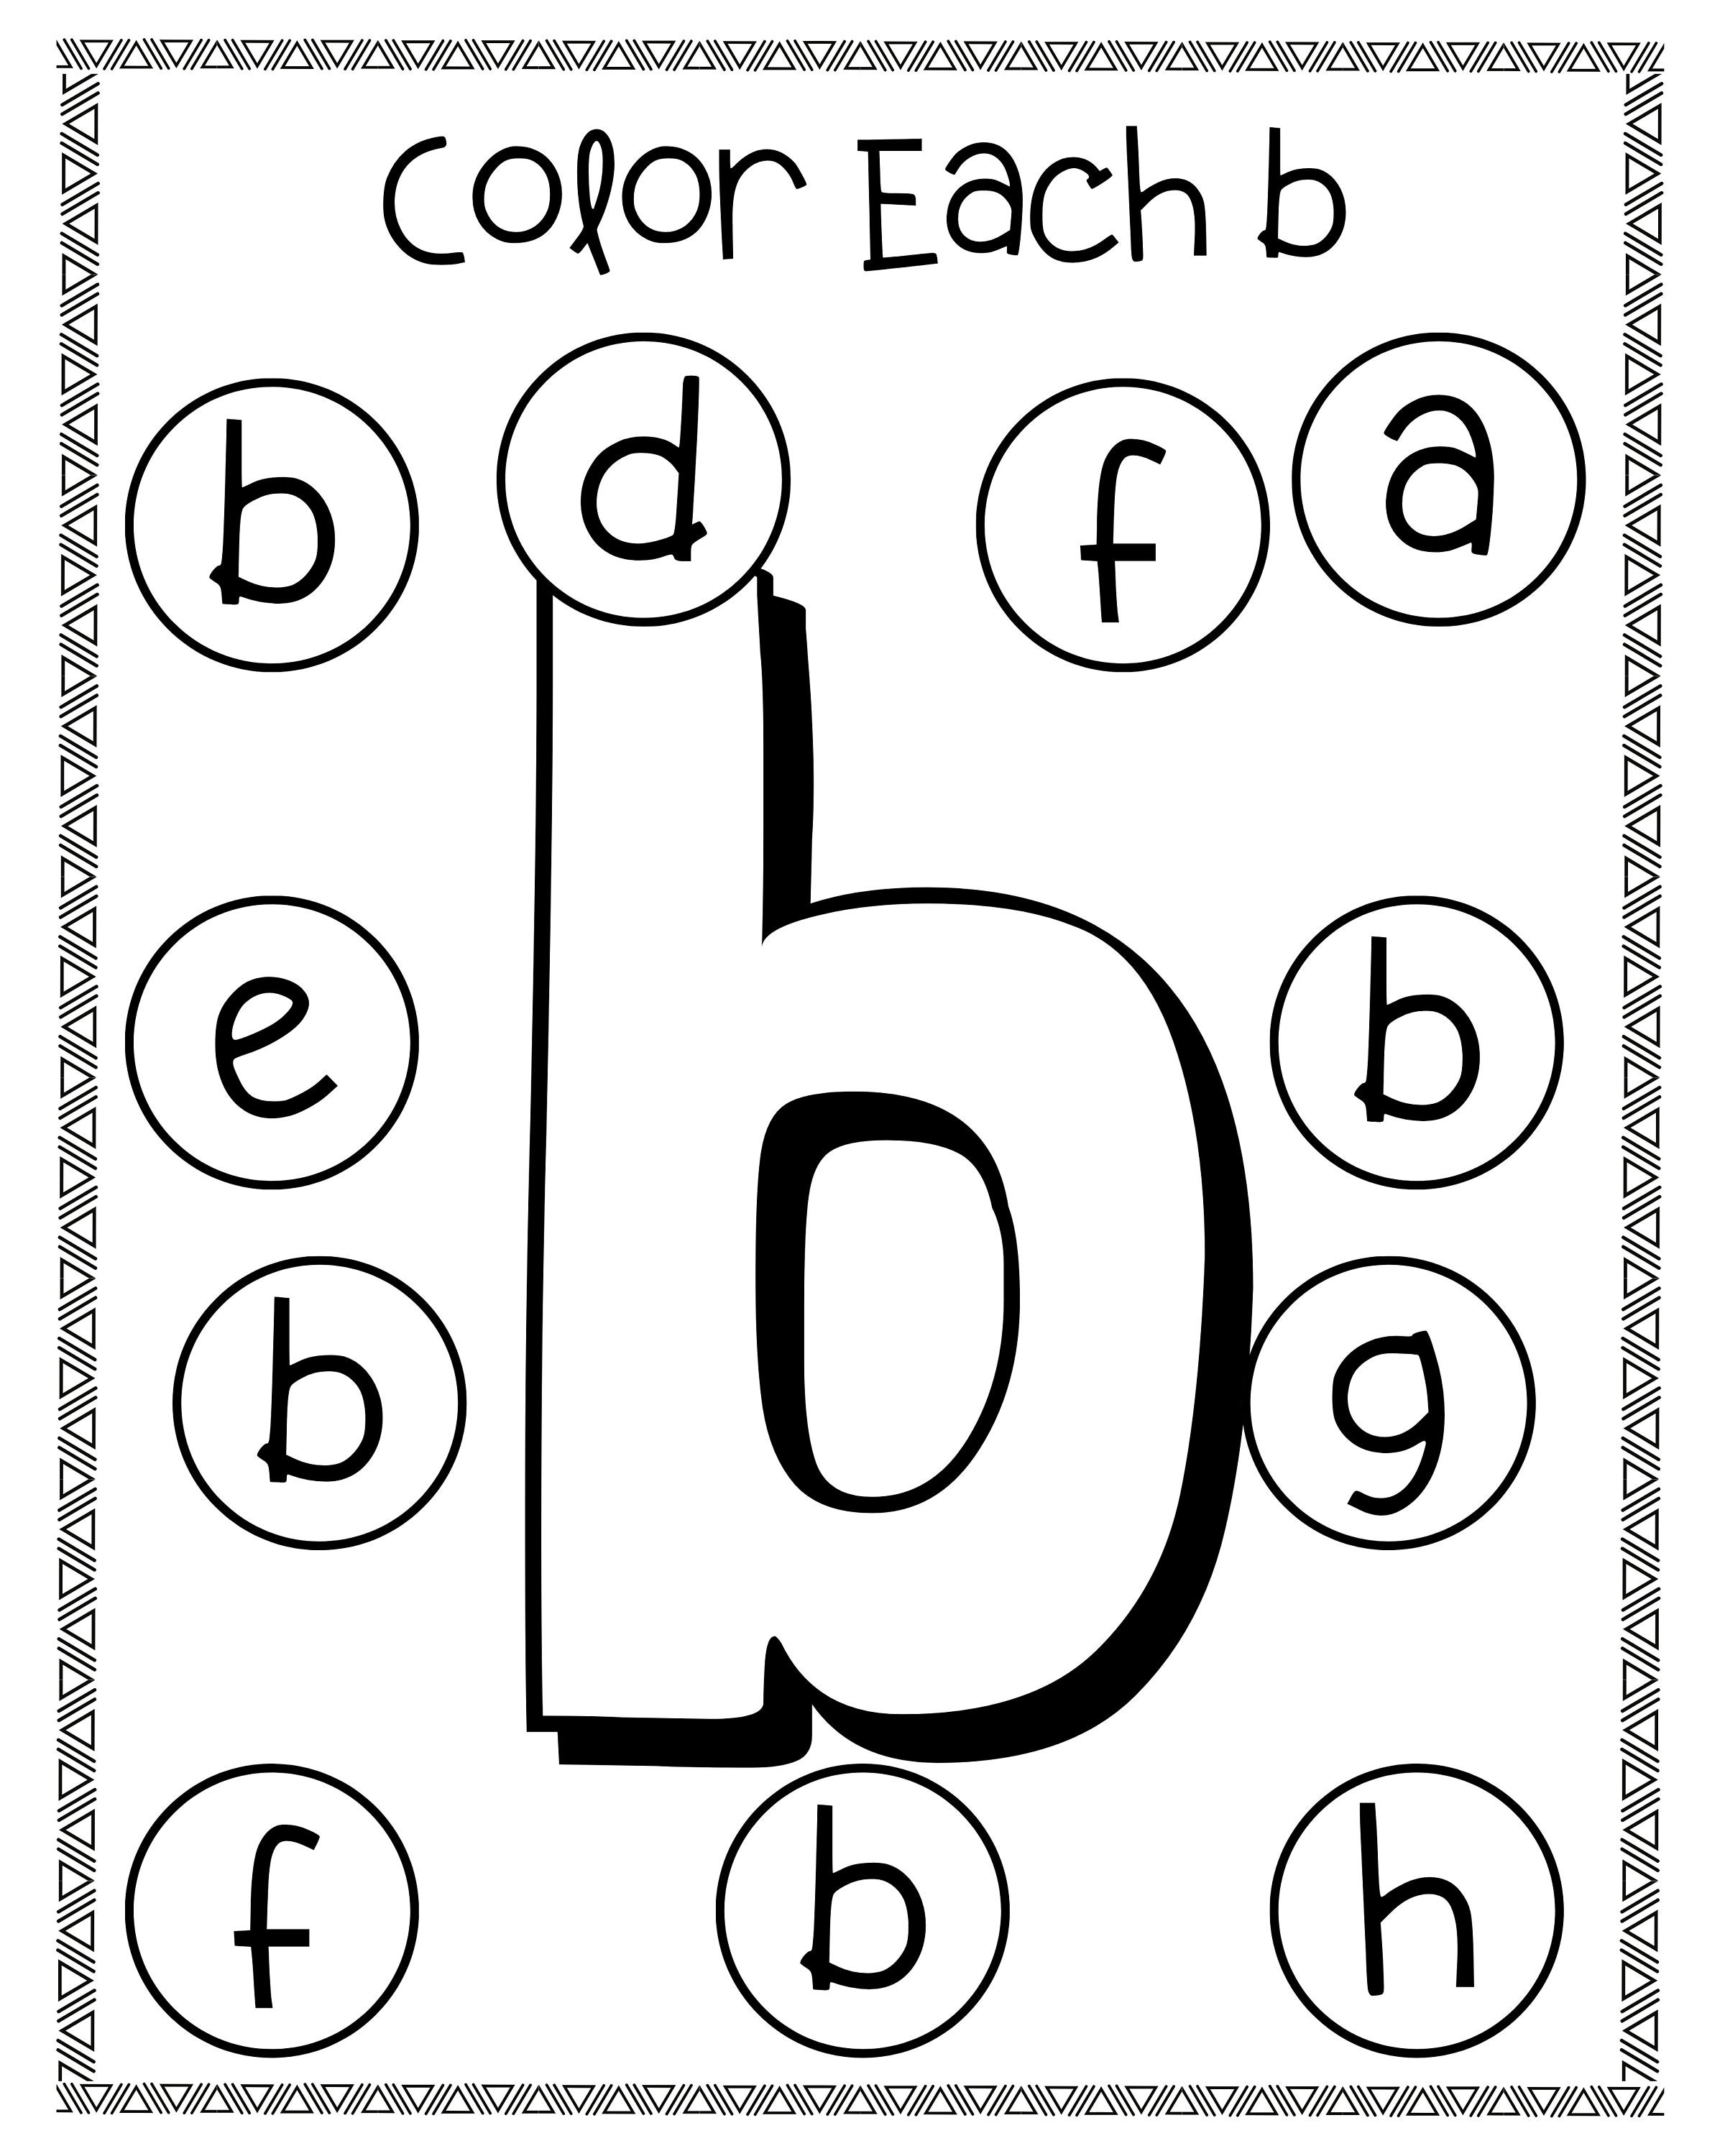 Alphabet Activity Book Coloring Pages Instant Digital | Etsy